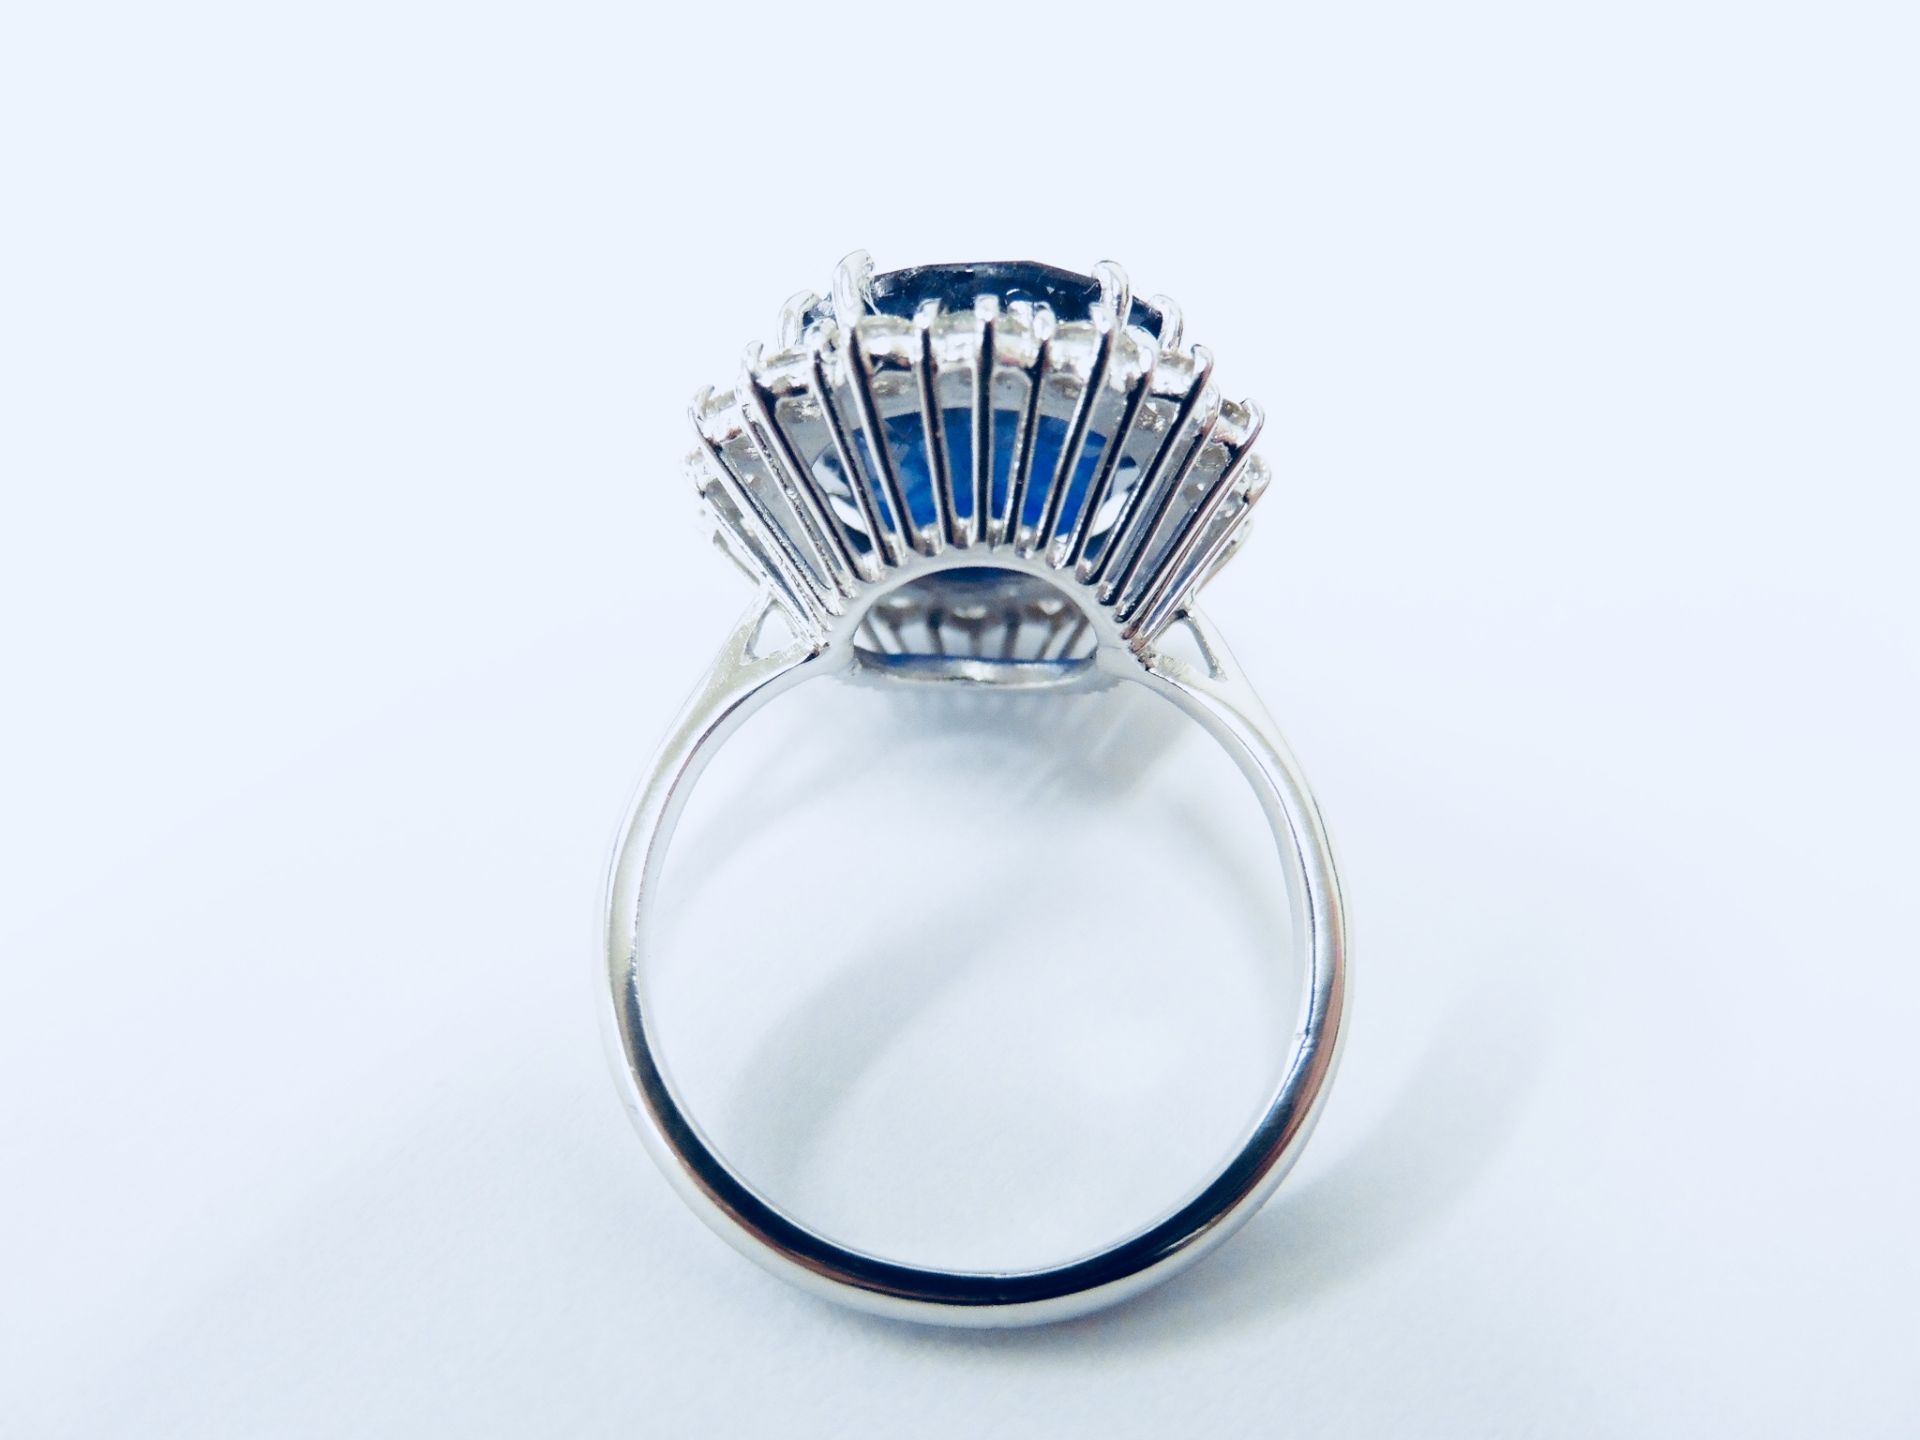 10Ct Sapphire And Diamond Cluster Ring. - Image 6 of 9